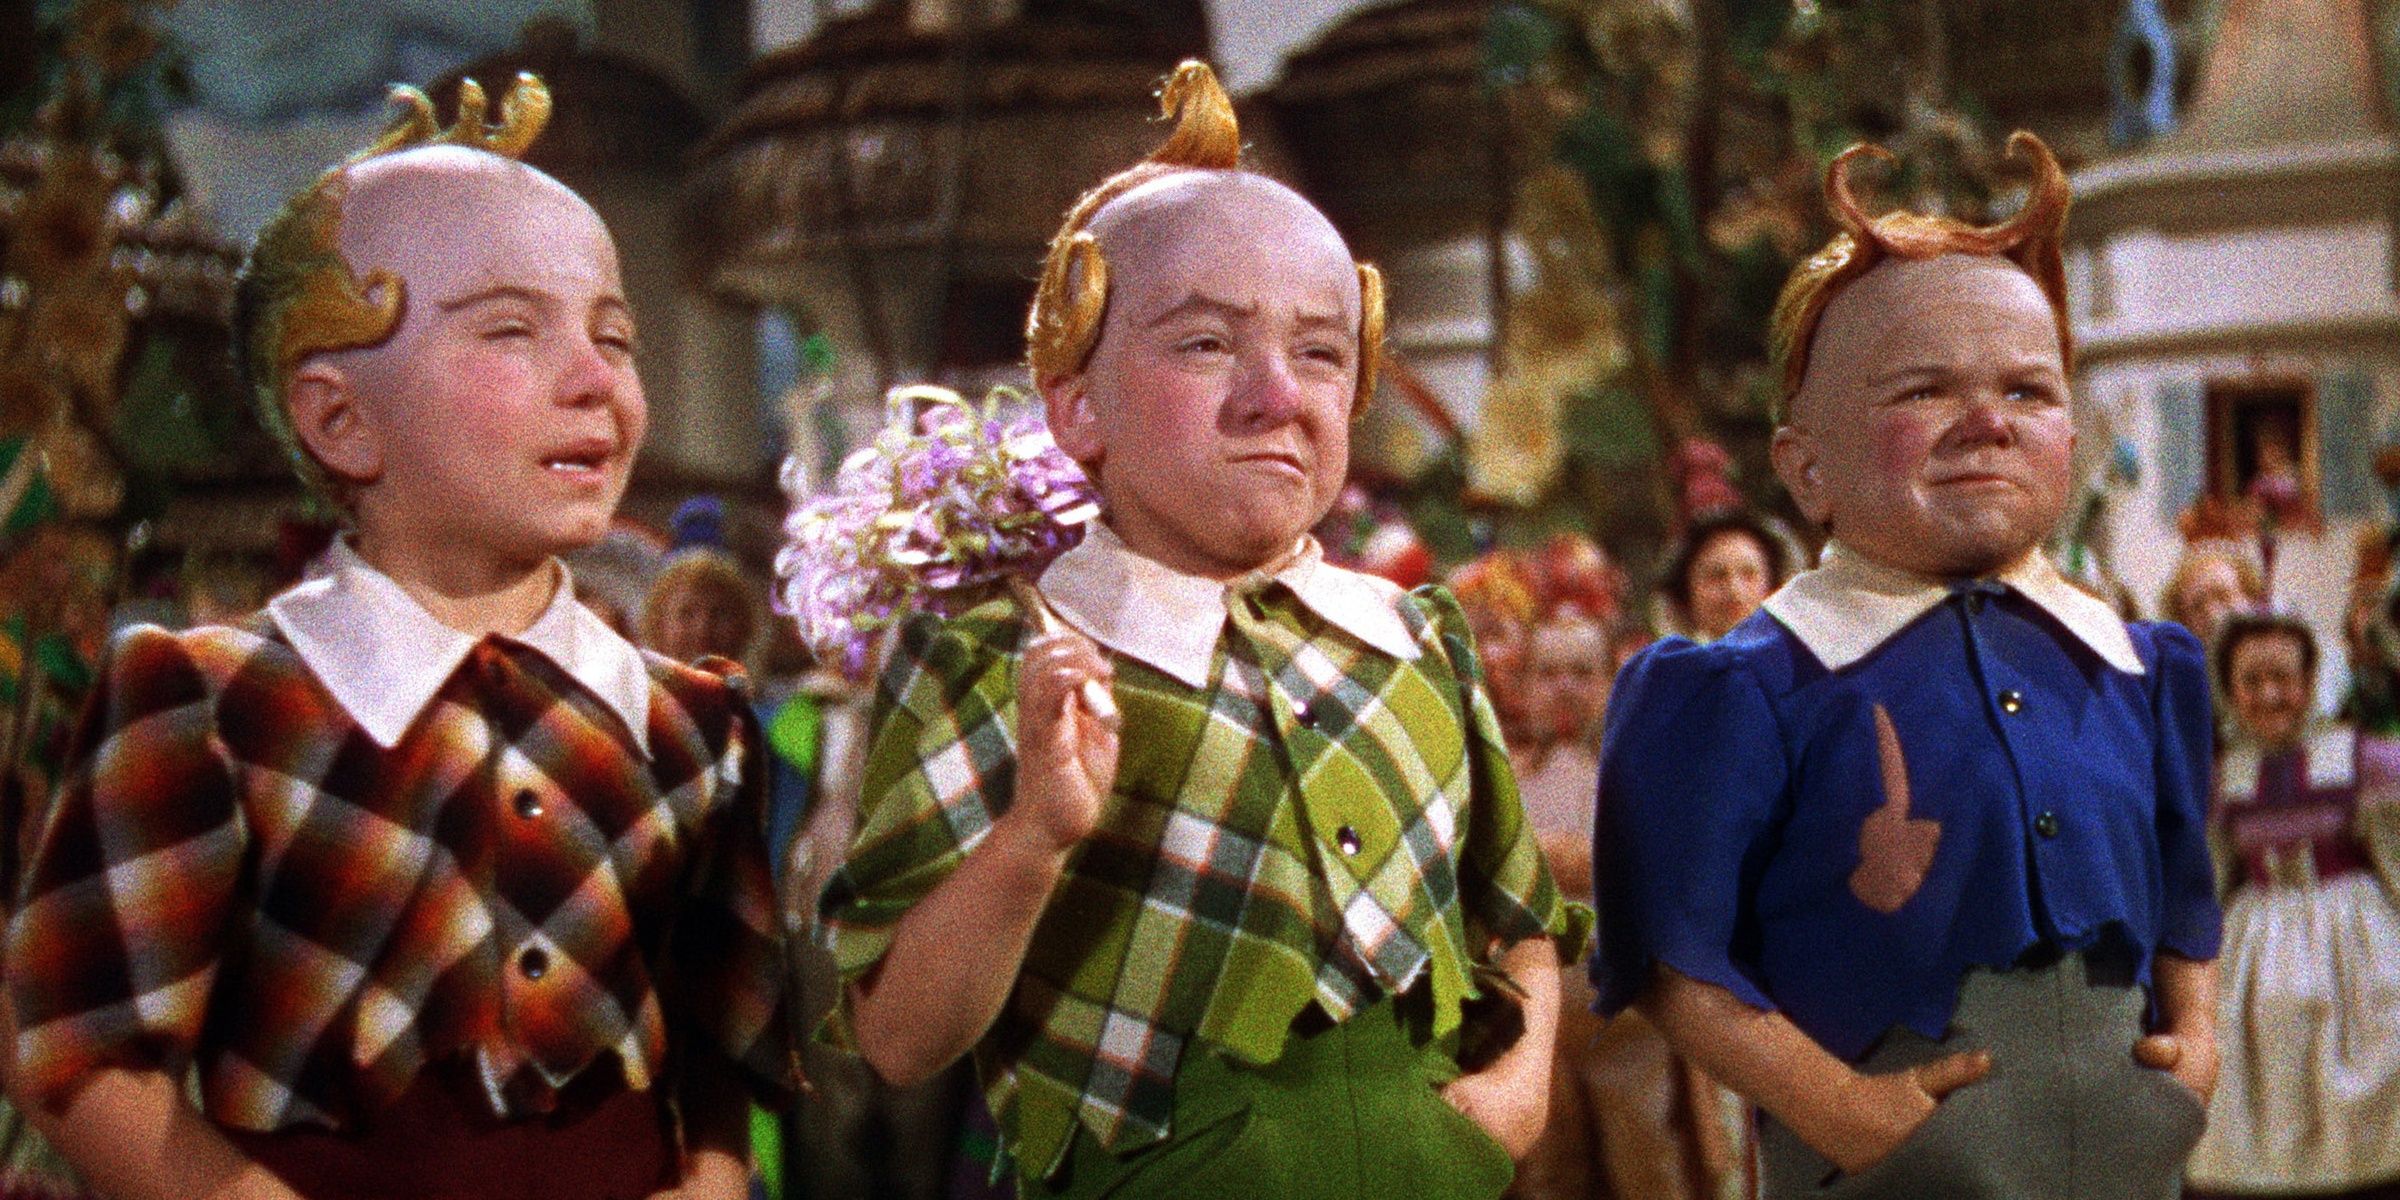 The Wizard Of Oz: Every Song, Ranked From Best To Worst